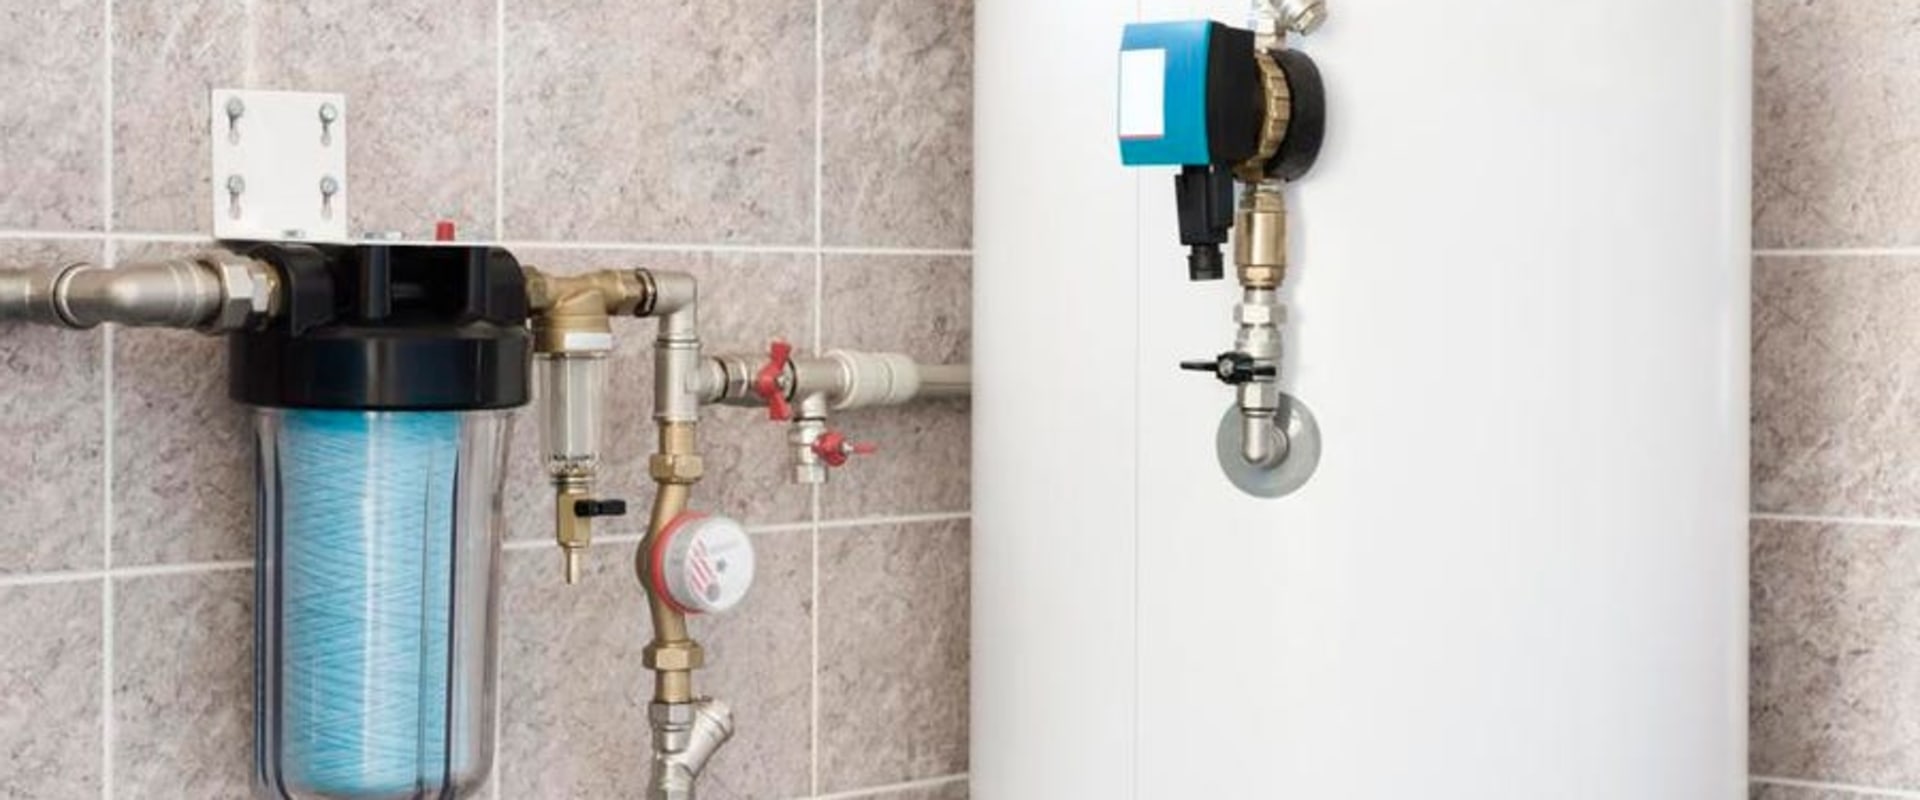 Who replaces hot water systems?